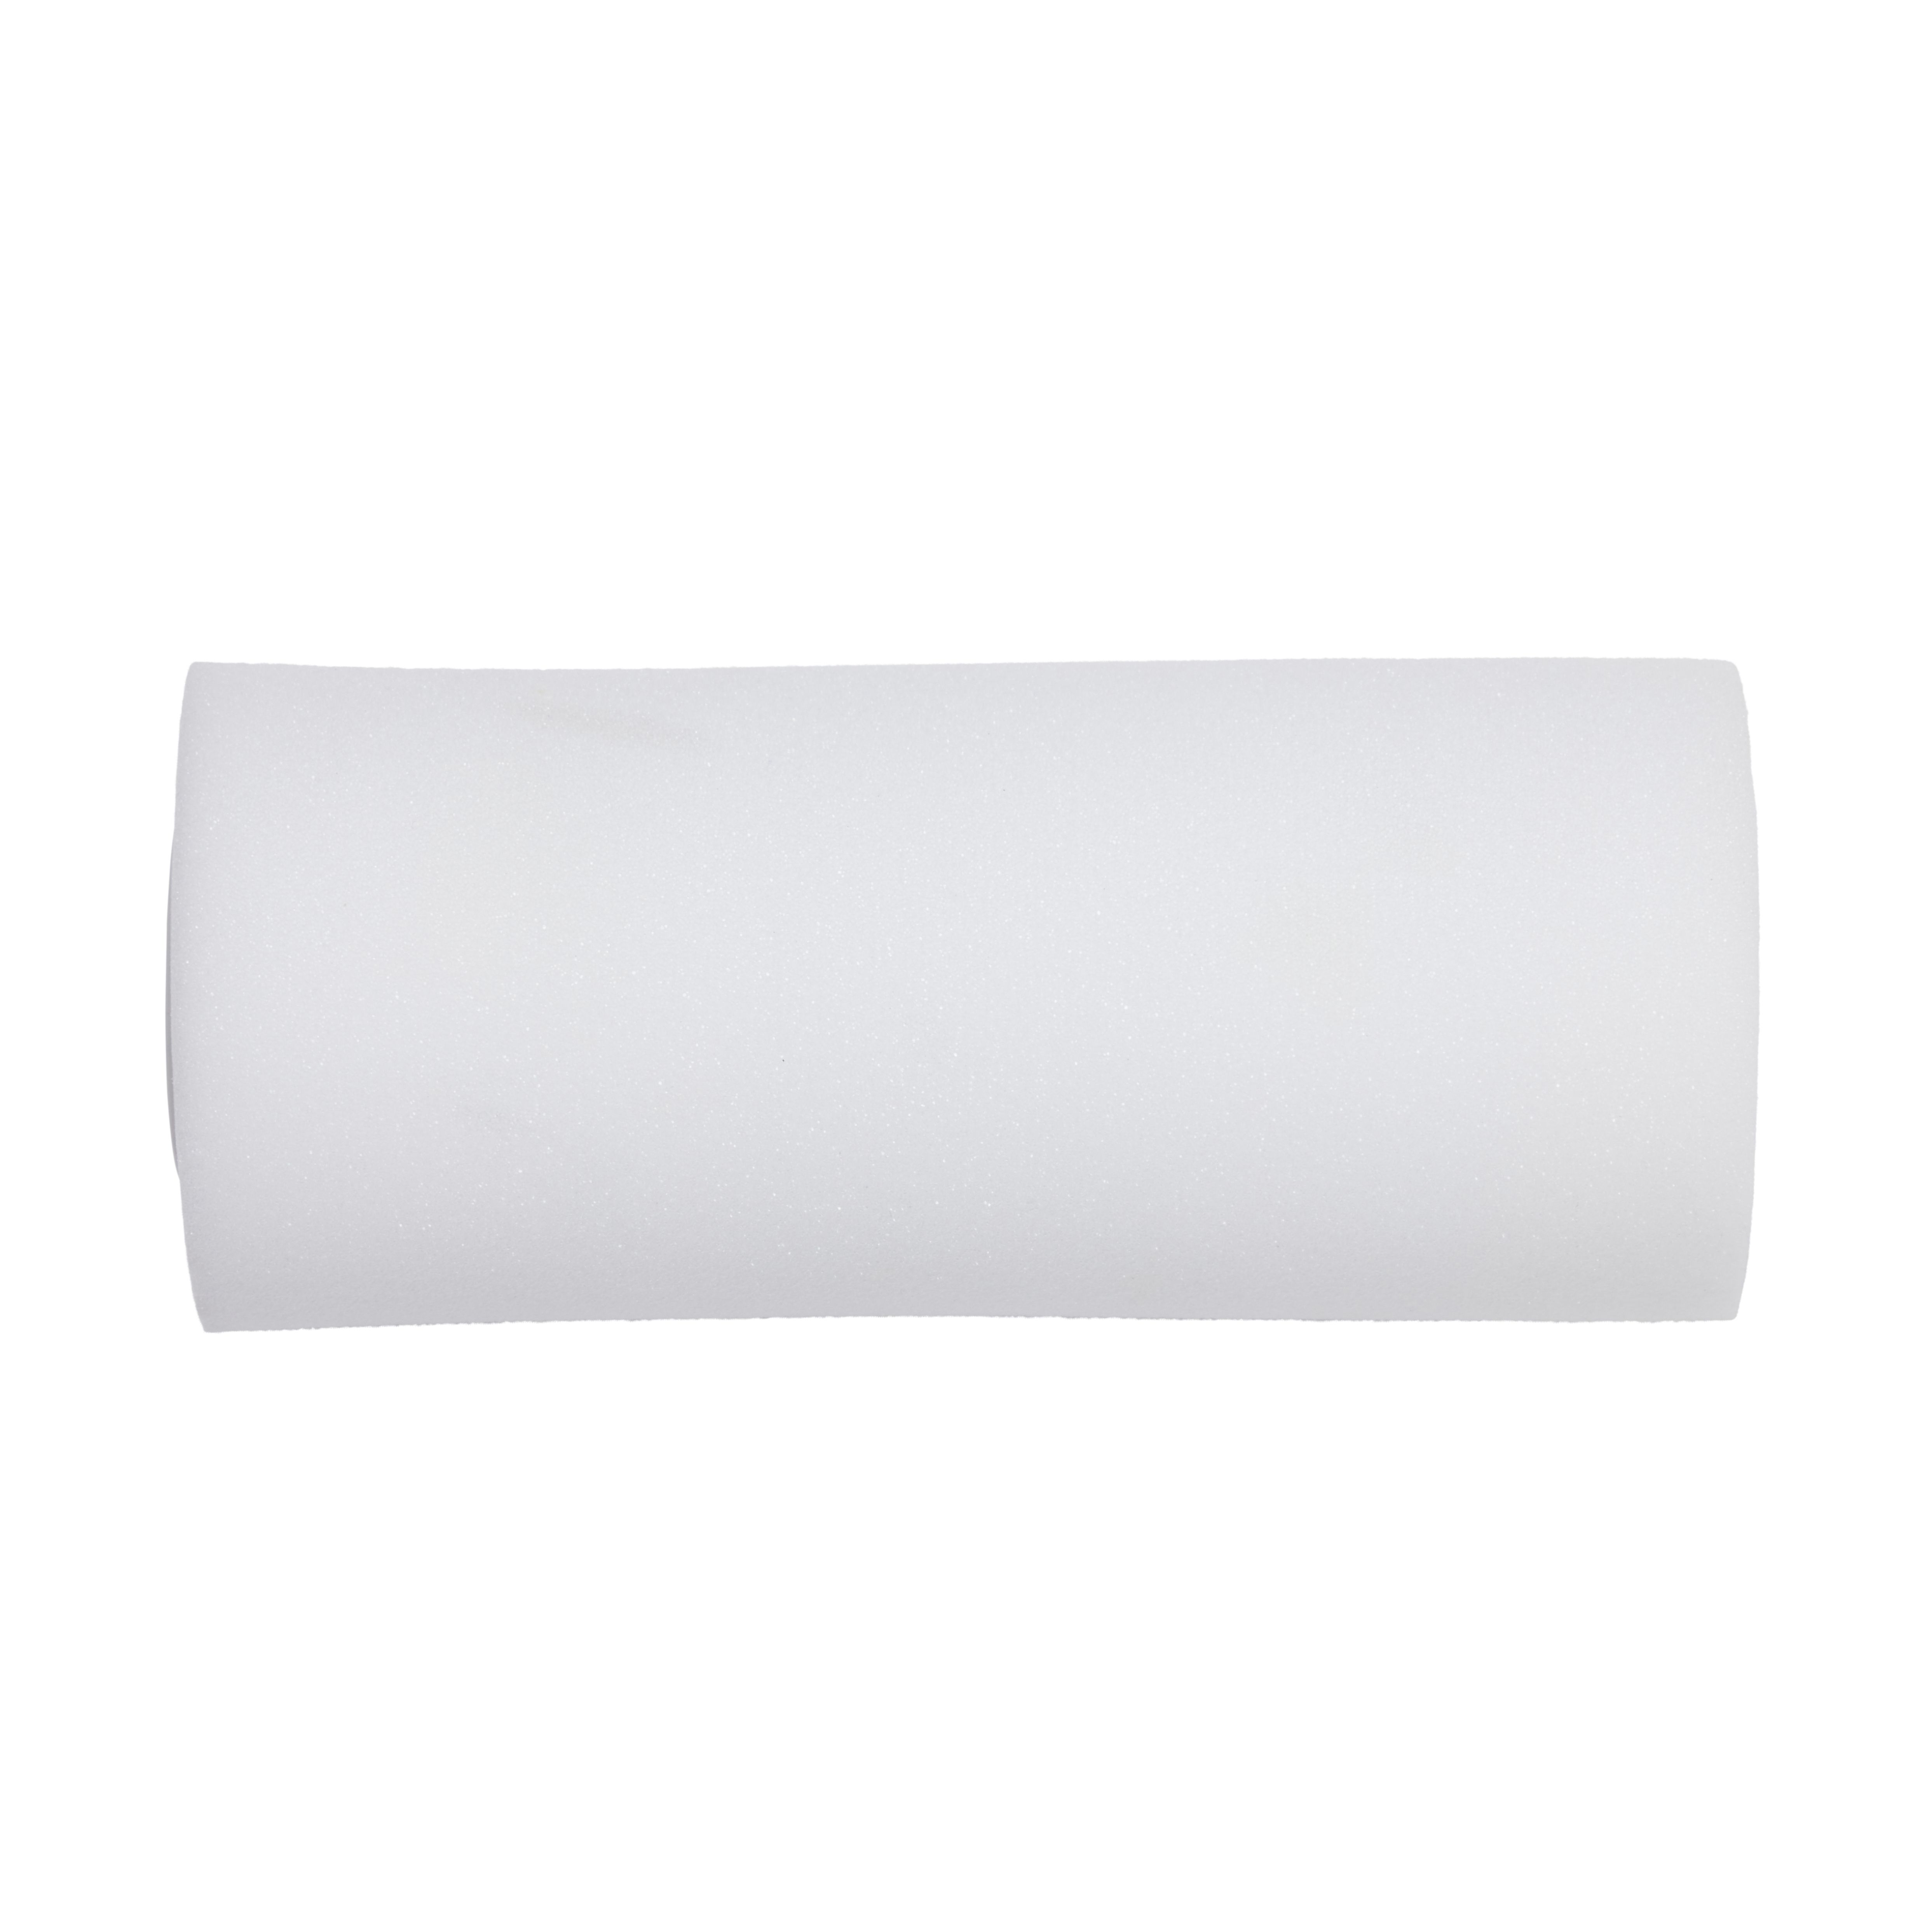 White Paper roll, Pack of 2